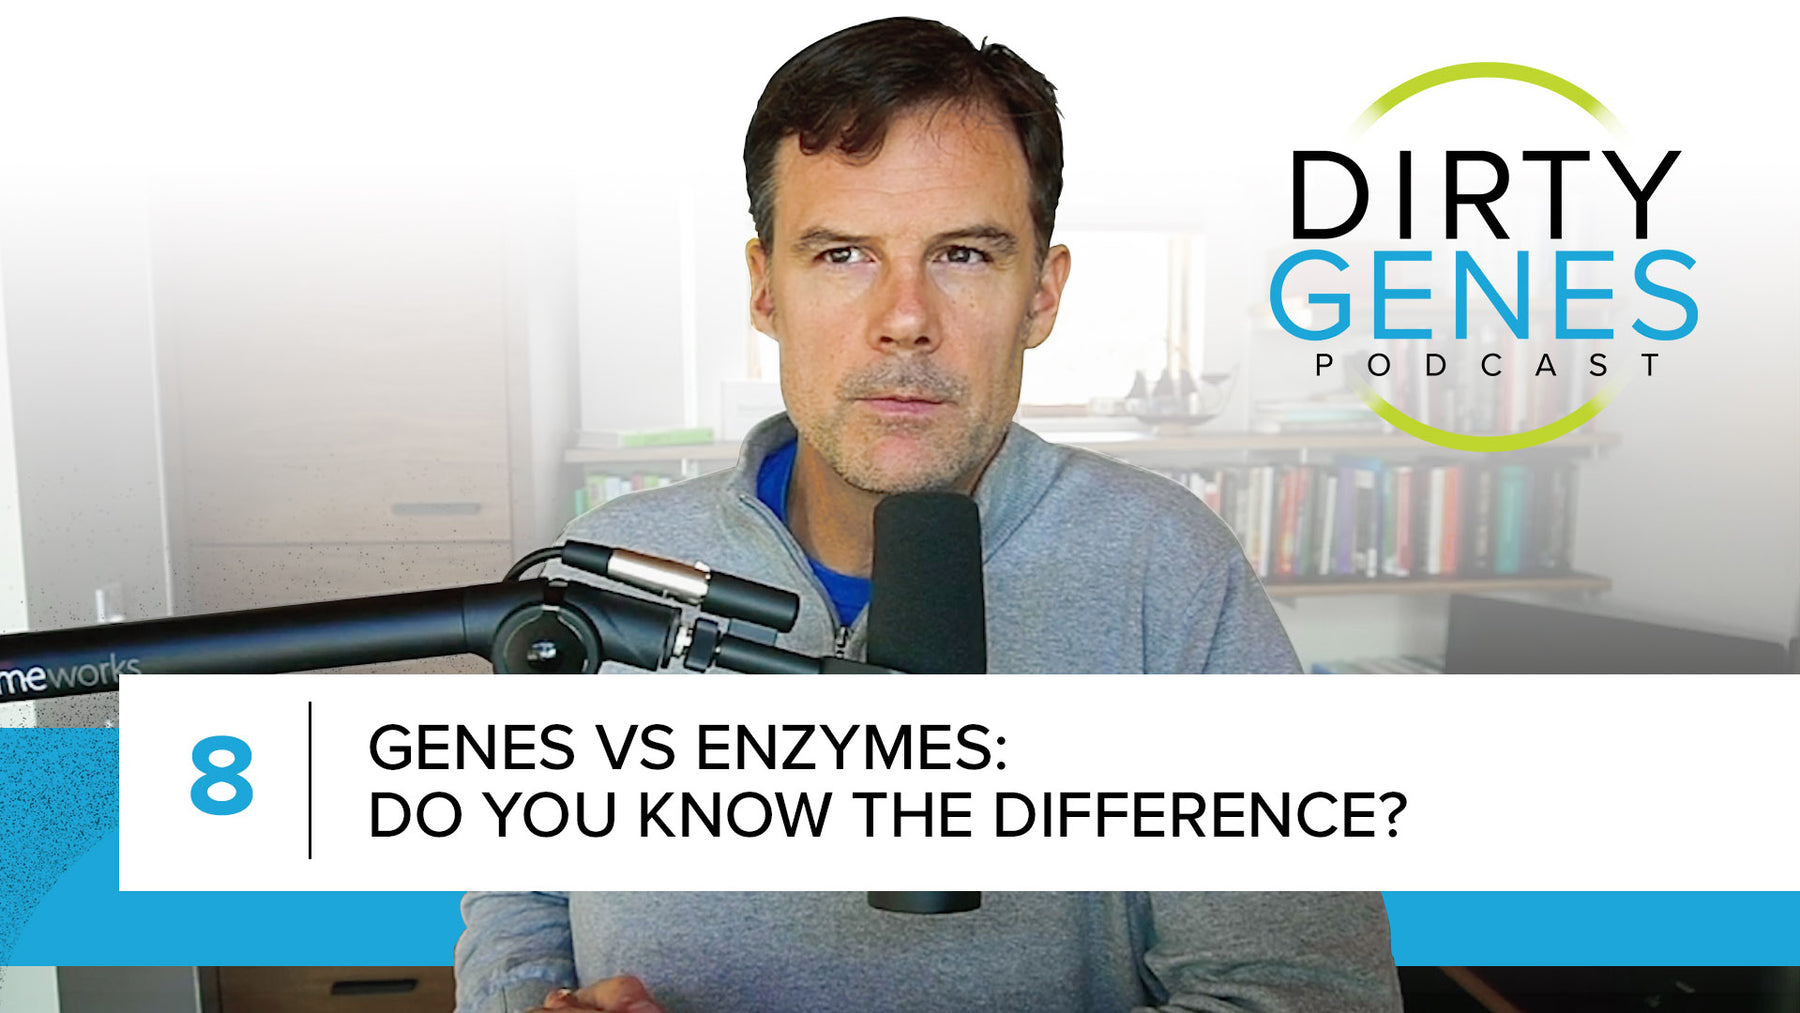 DGP: Genes vs. Enzymes: Do you know the difference? [Episode 8]